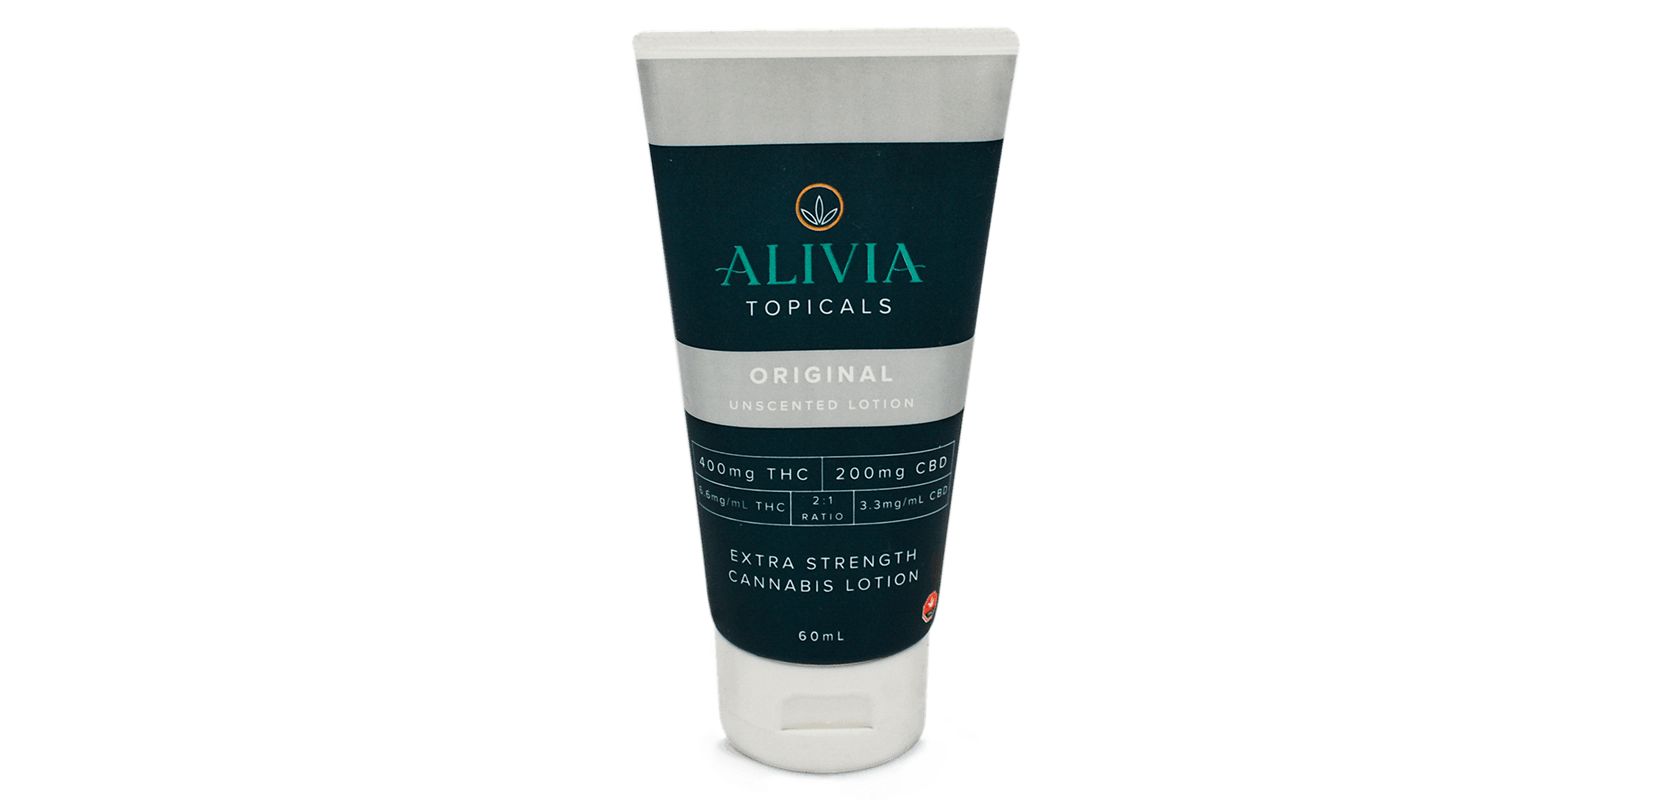 ALIVIA Topicals Original Soothing Lotion Unscented is a cannabis topical product that is designed to provide relief from various conditions, including arthritis, dry skin, eczema, and psoriasis. 